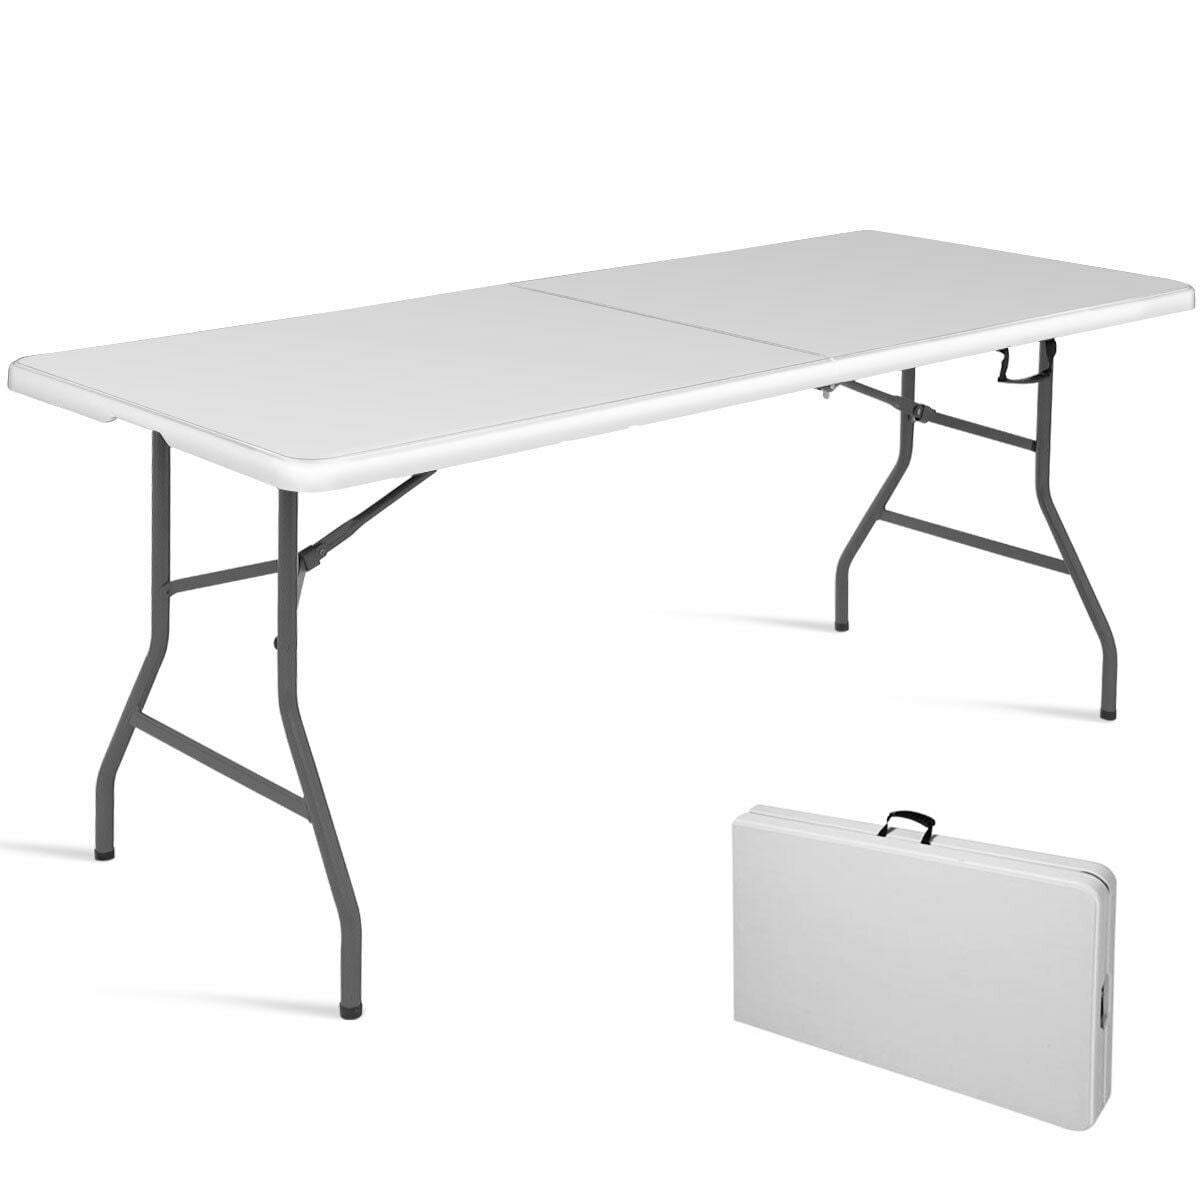 Costway 6  Folding Table Portable Plastic Indoor Outdoor Picnic Party Dining Camp Tables $69.99 @Walmart